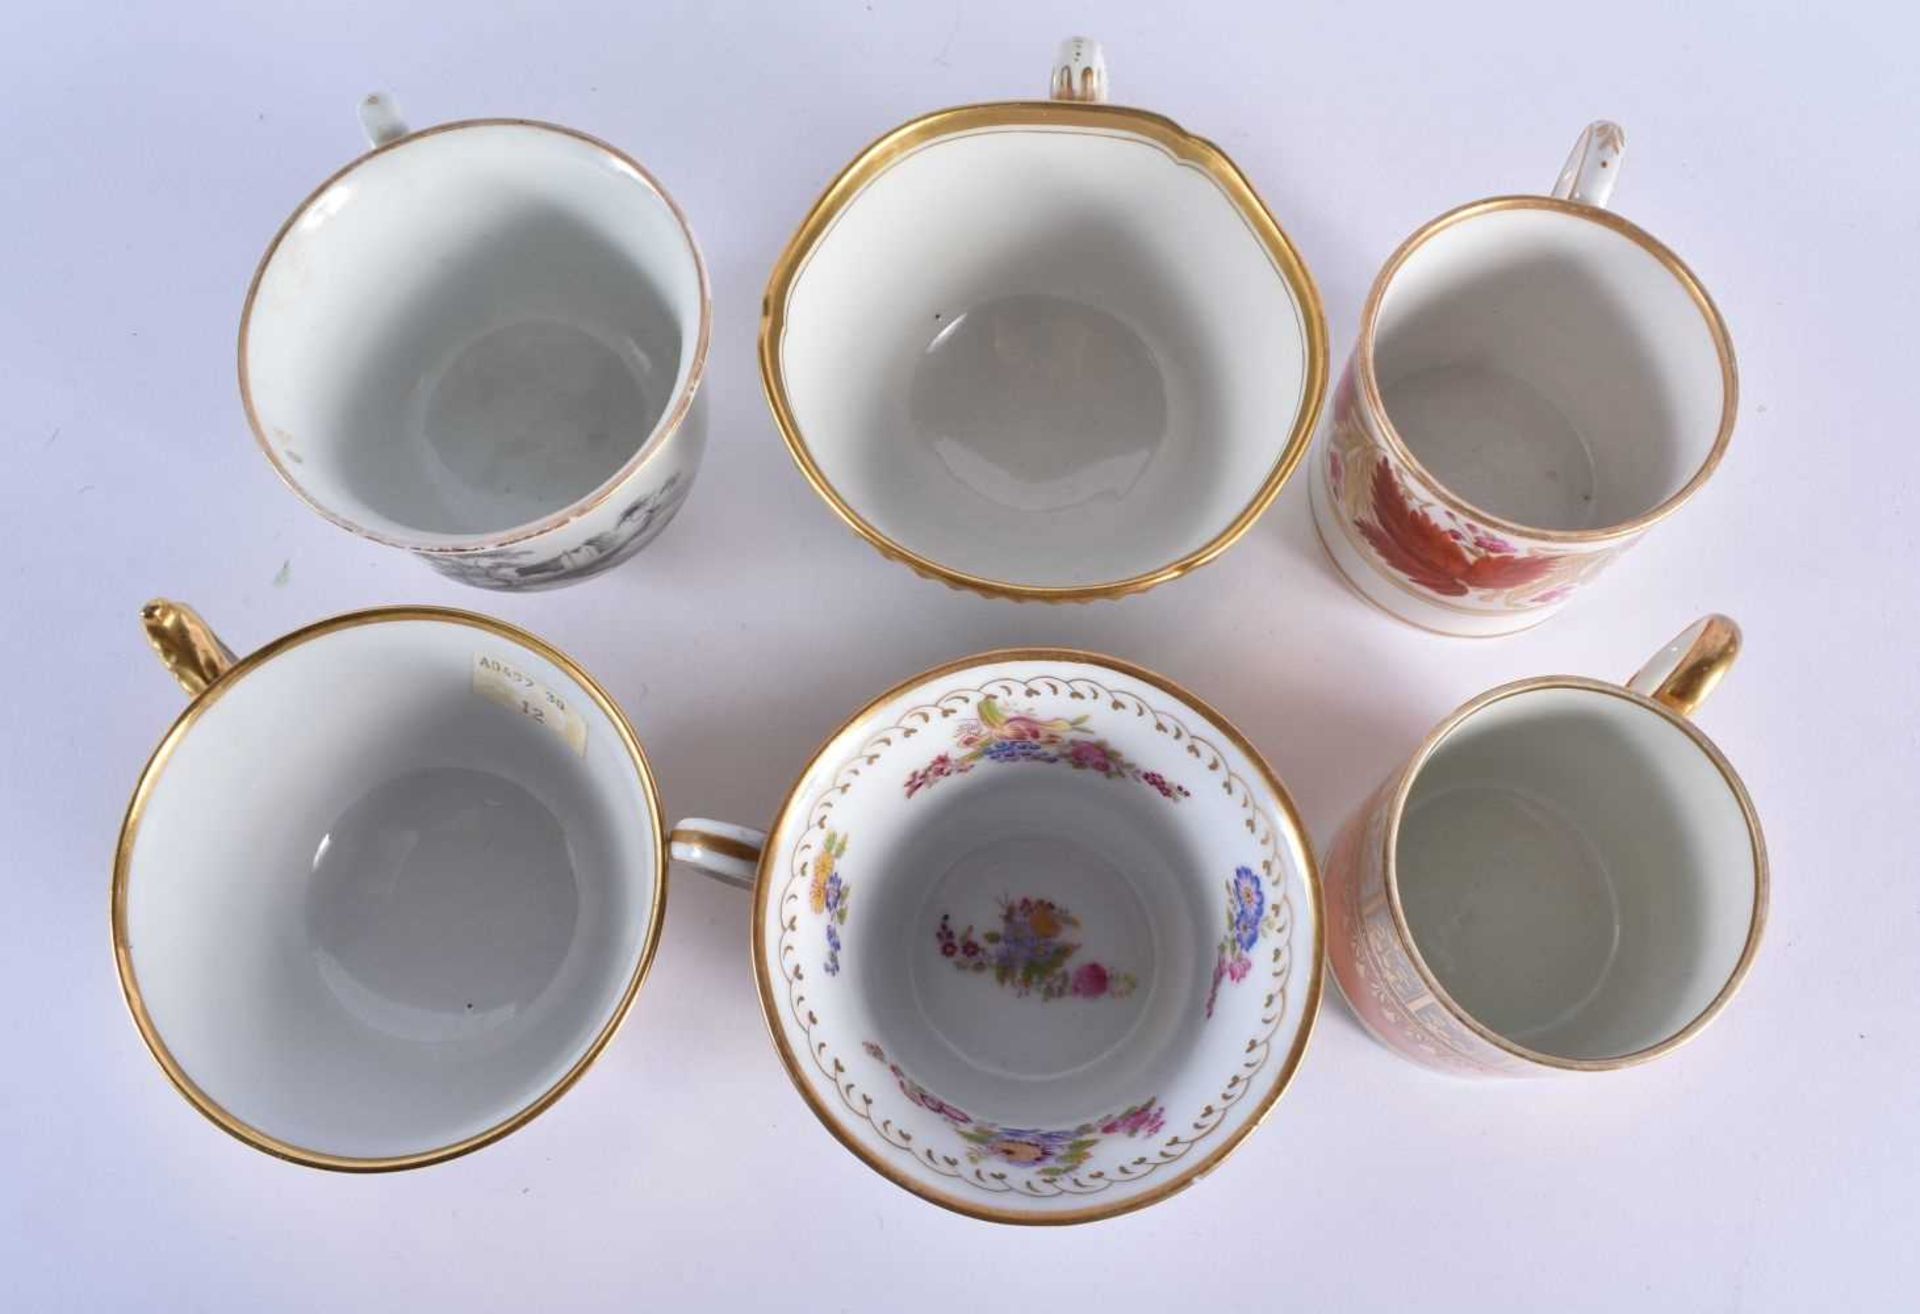 TWELVE LATE 18TH/19TH CENTURY ENGLISH PORCELAIN CUPS including Chmaberlains & Graingers Worcester. - Image 8 of 9